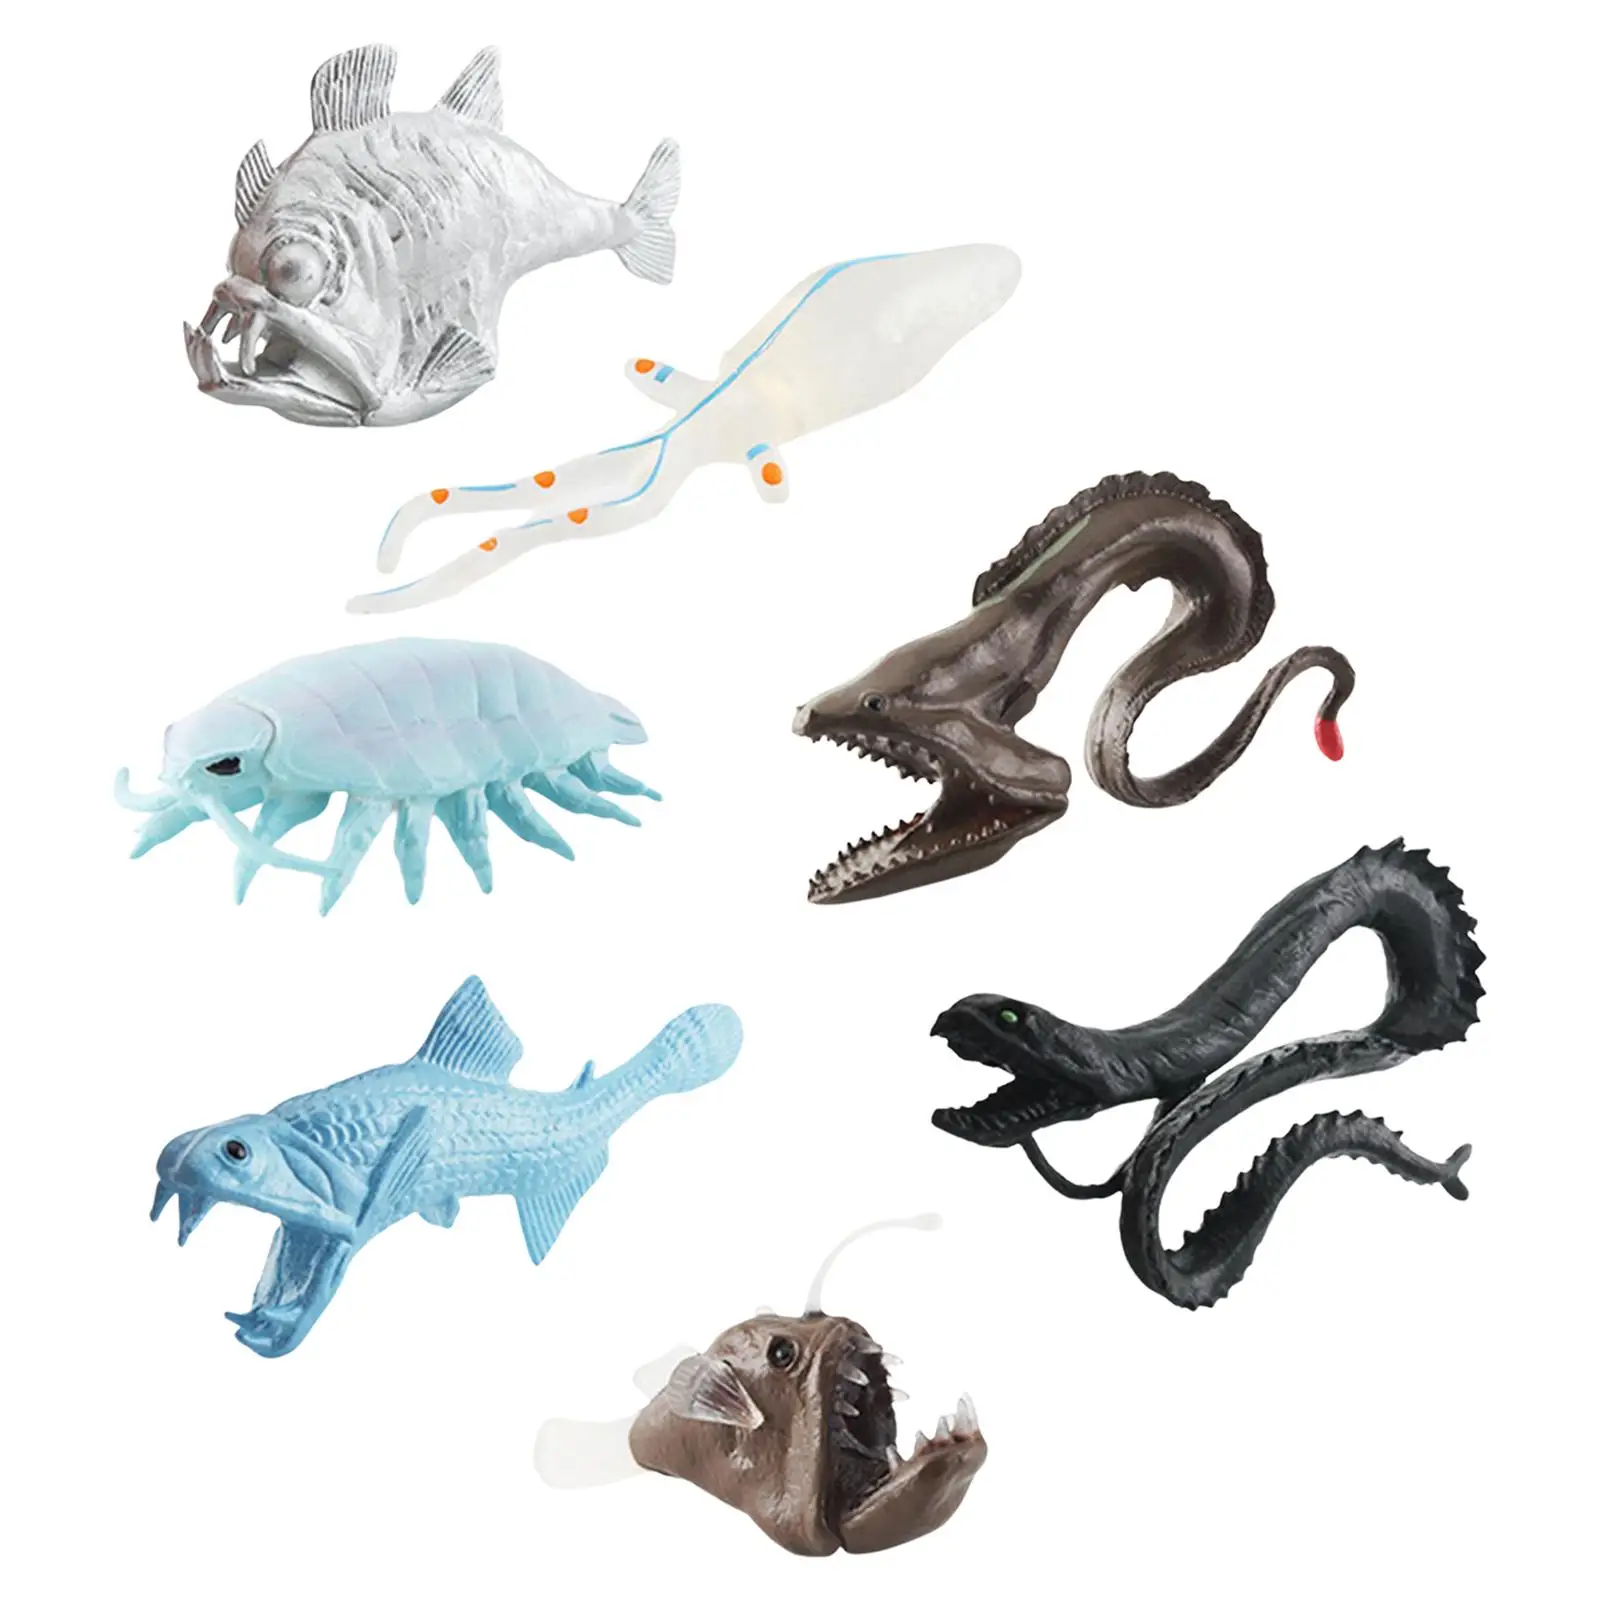 7Pcs Hand Painted Sea Biology Animal Figure Cake Toppers Ornaments Realistic Detailed Action Figures for Toddlers Kids